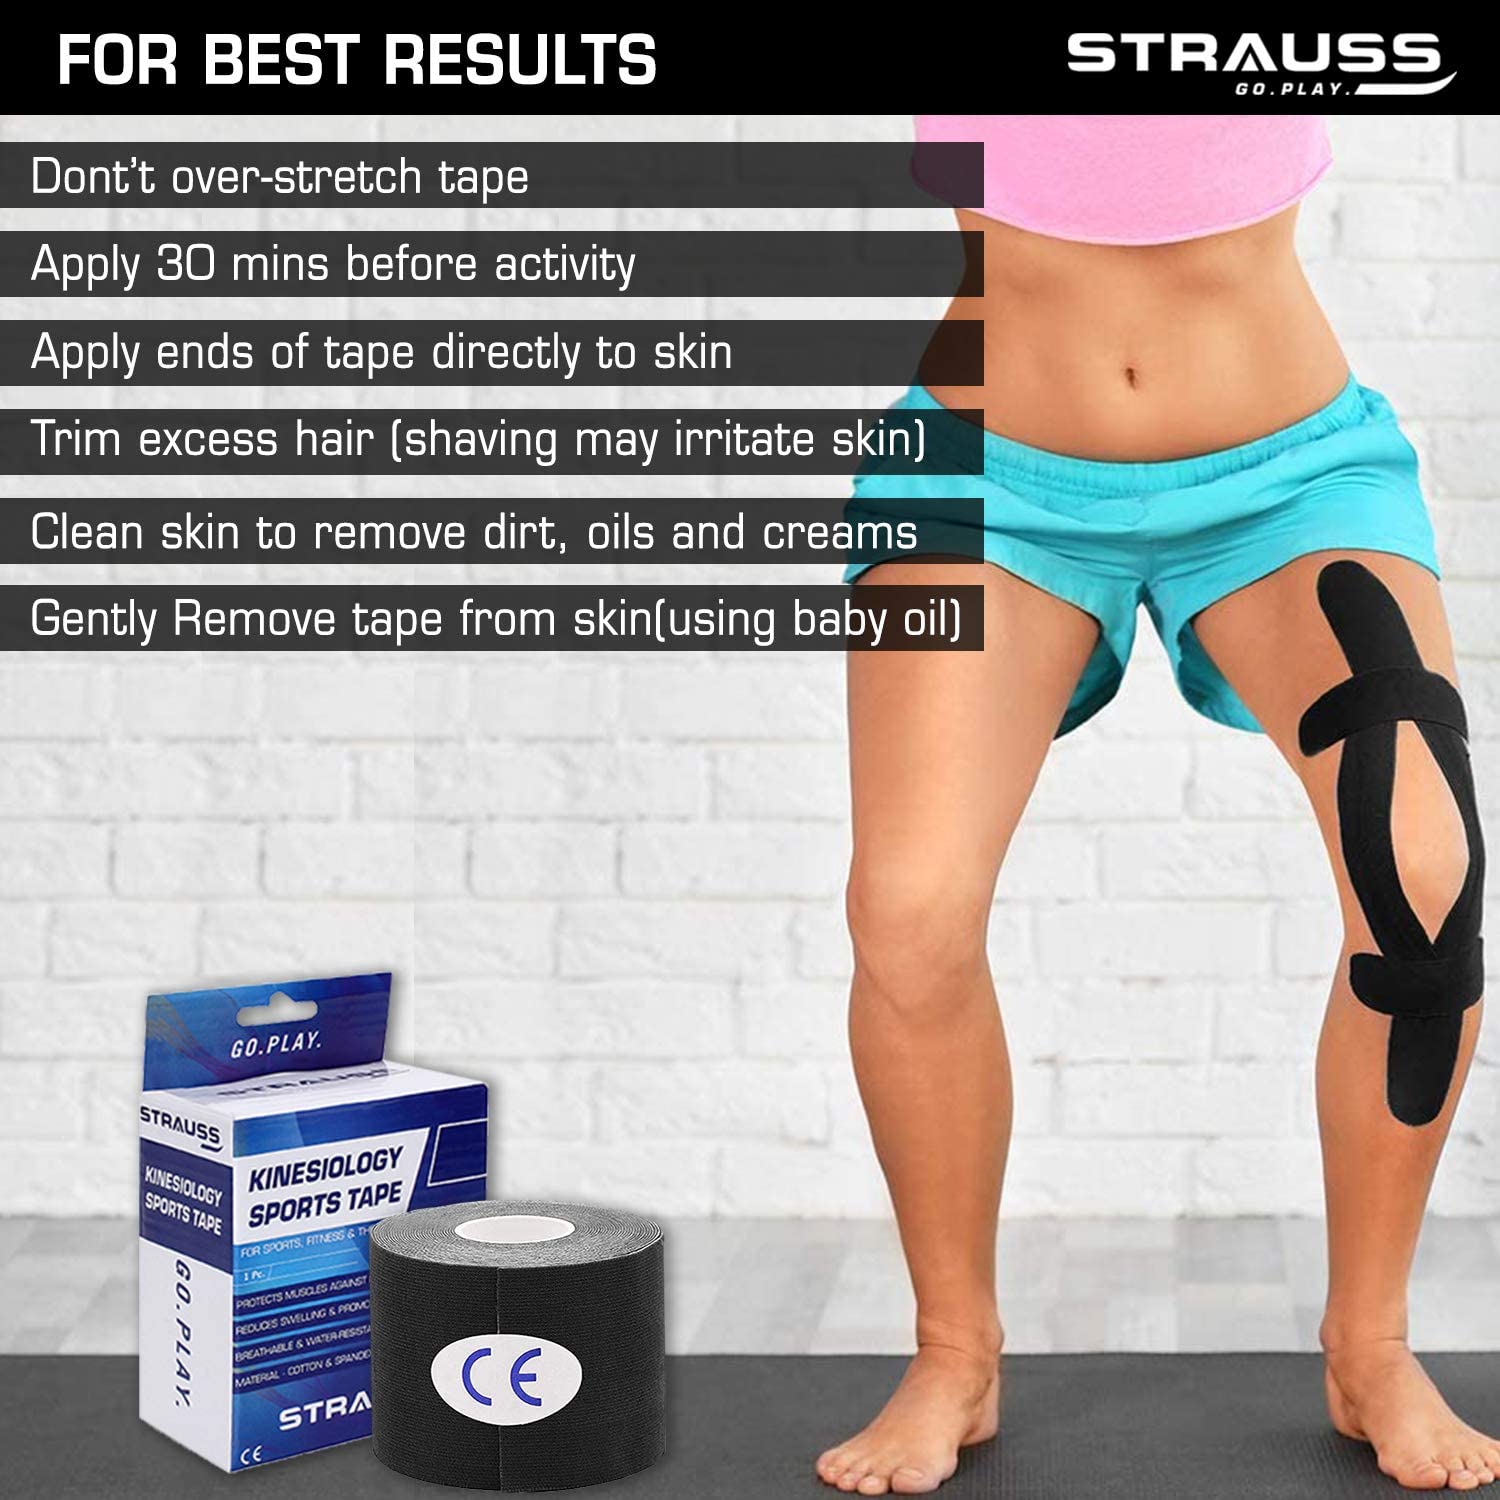 Strauss Kinesiology Sports Tape Knee, Calf & Thigh Support, (Black), (Pack of 2)